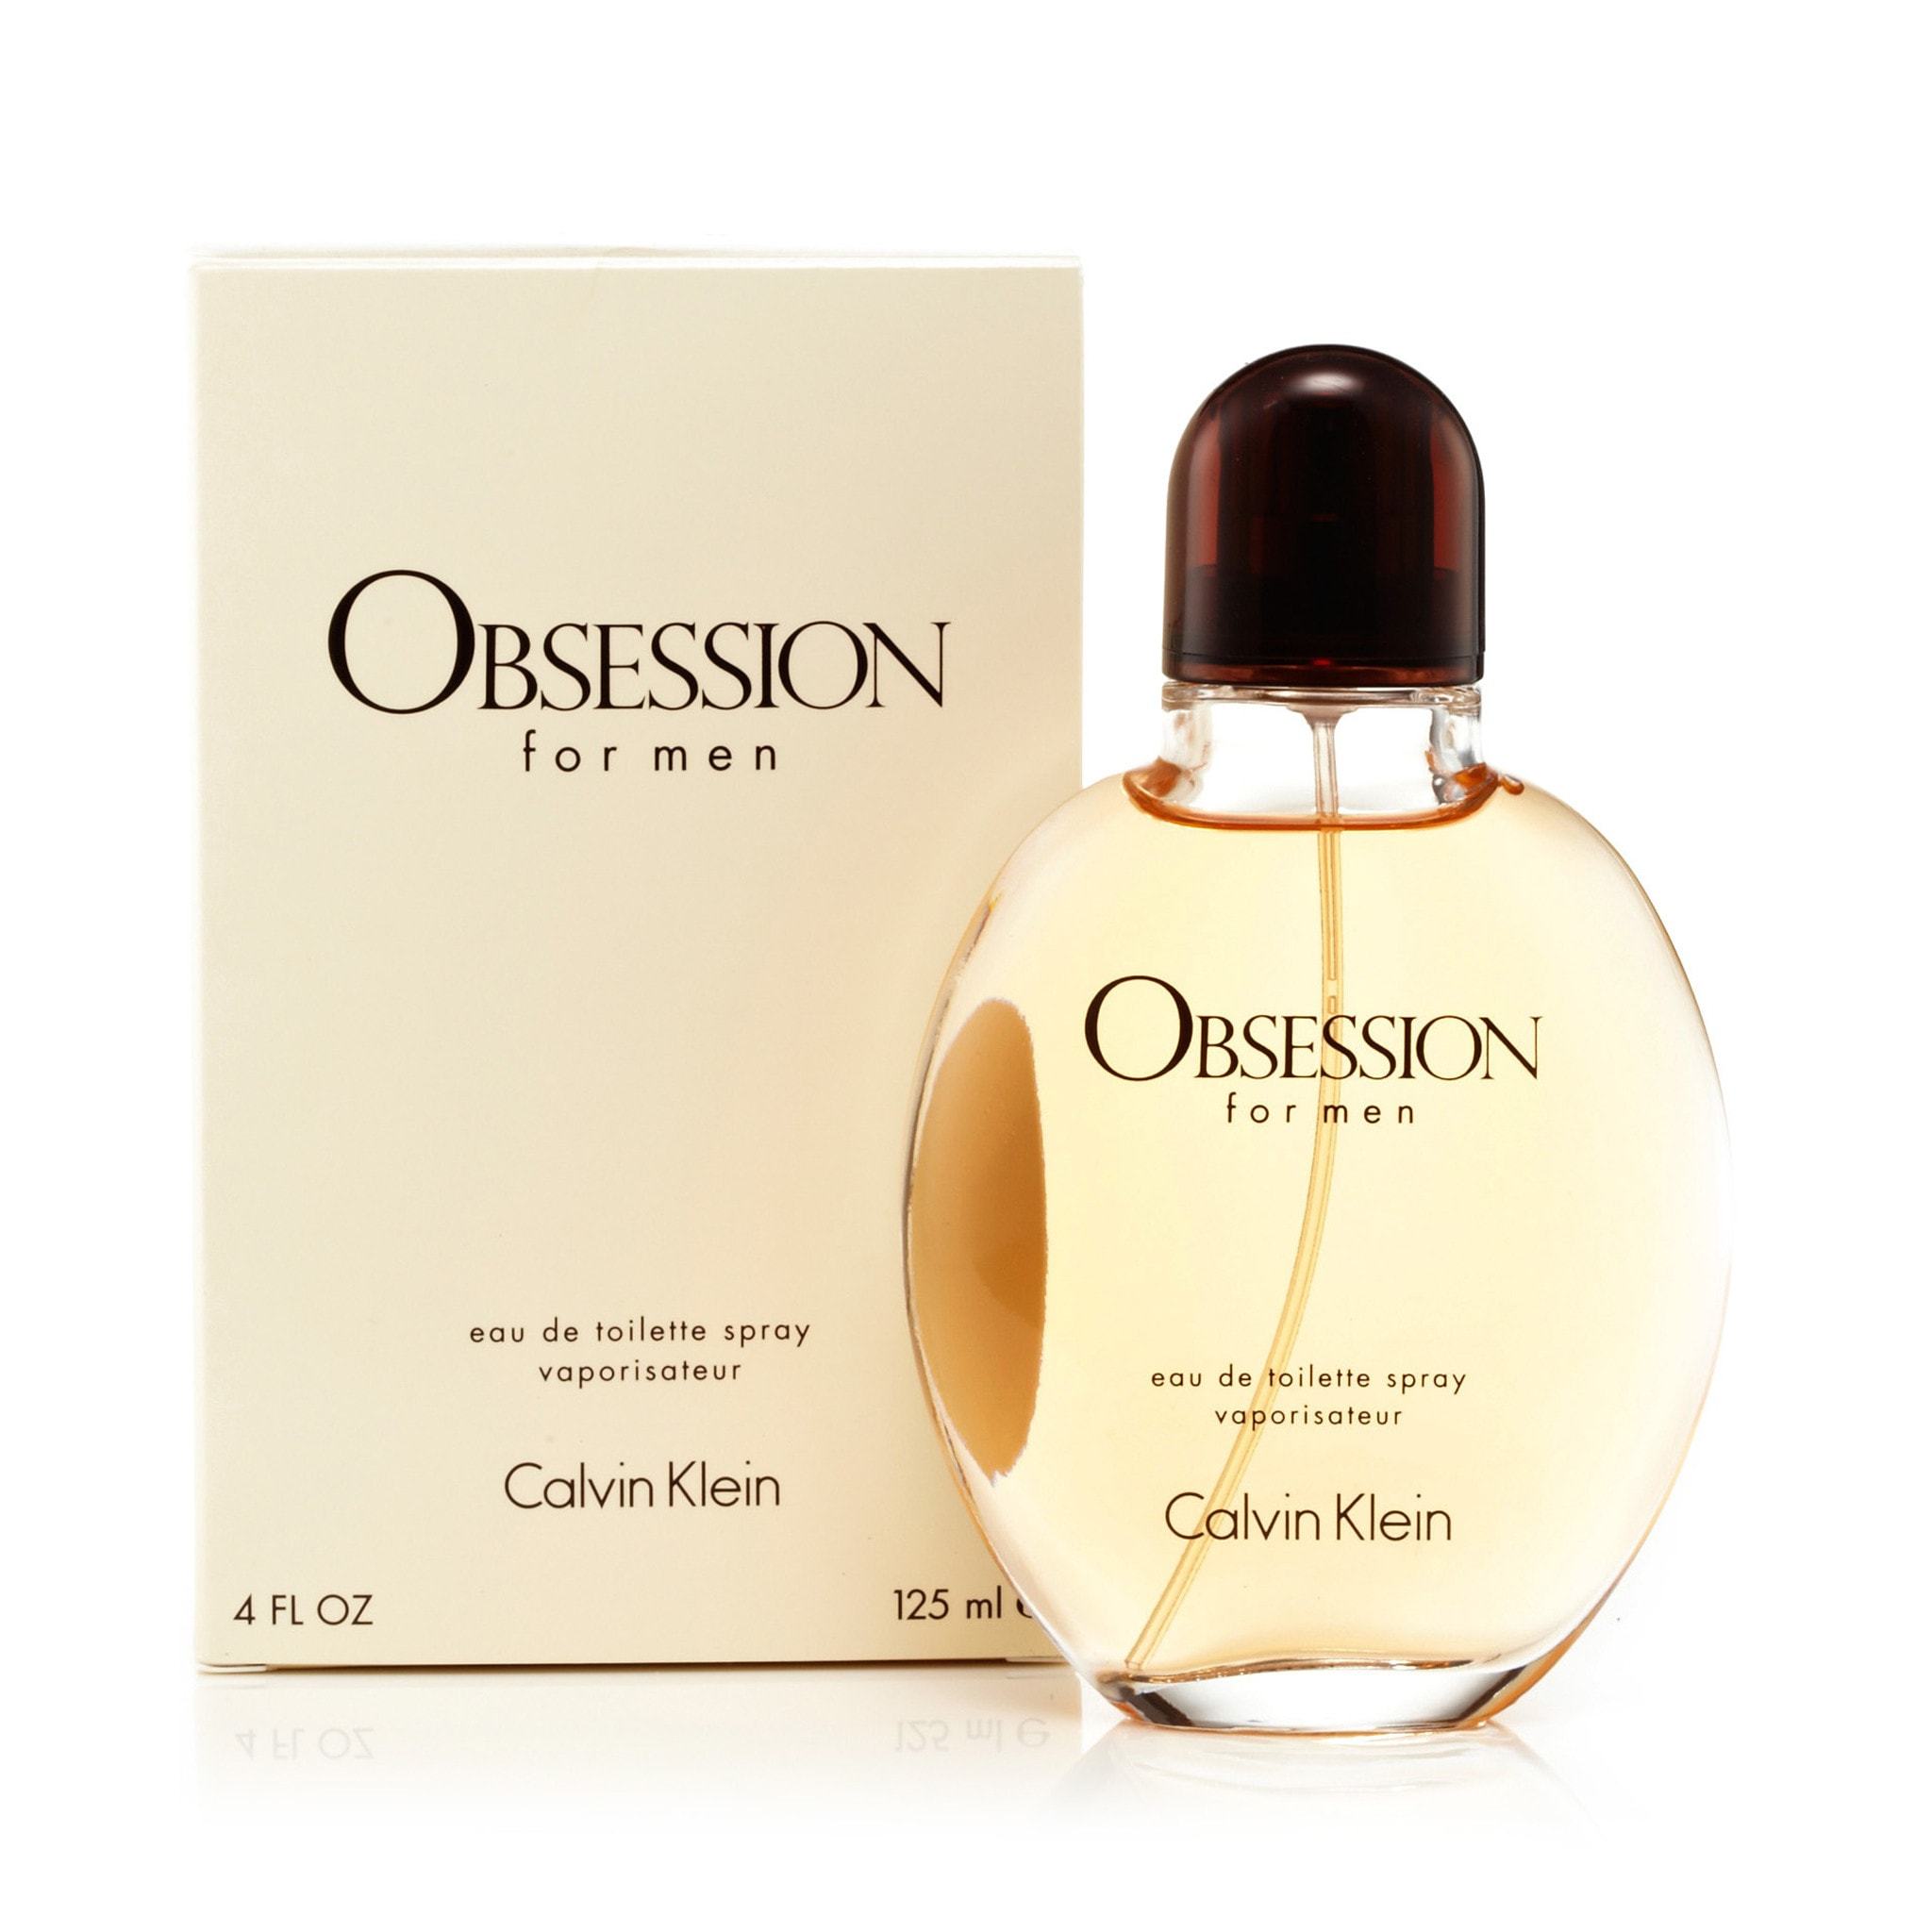 About Fragrance Outlet: Reviews & Promotions - Fragrance Outlet